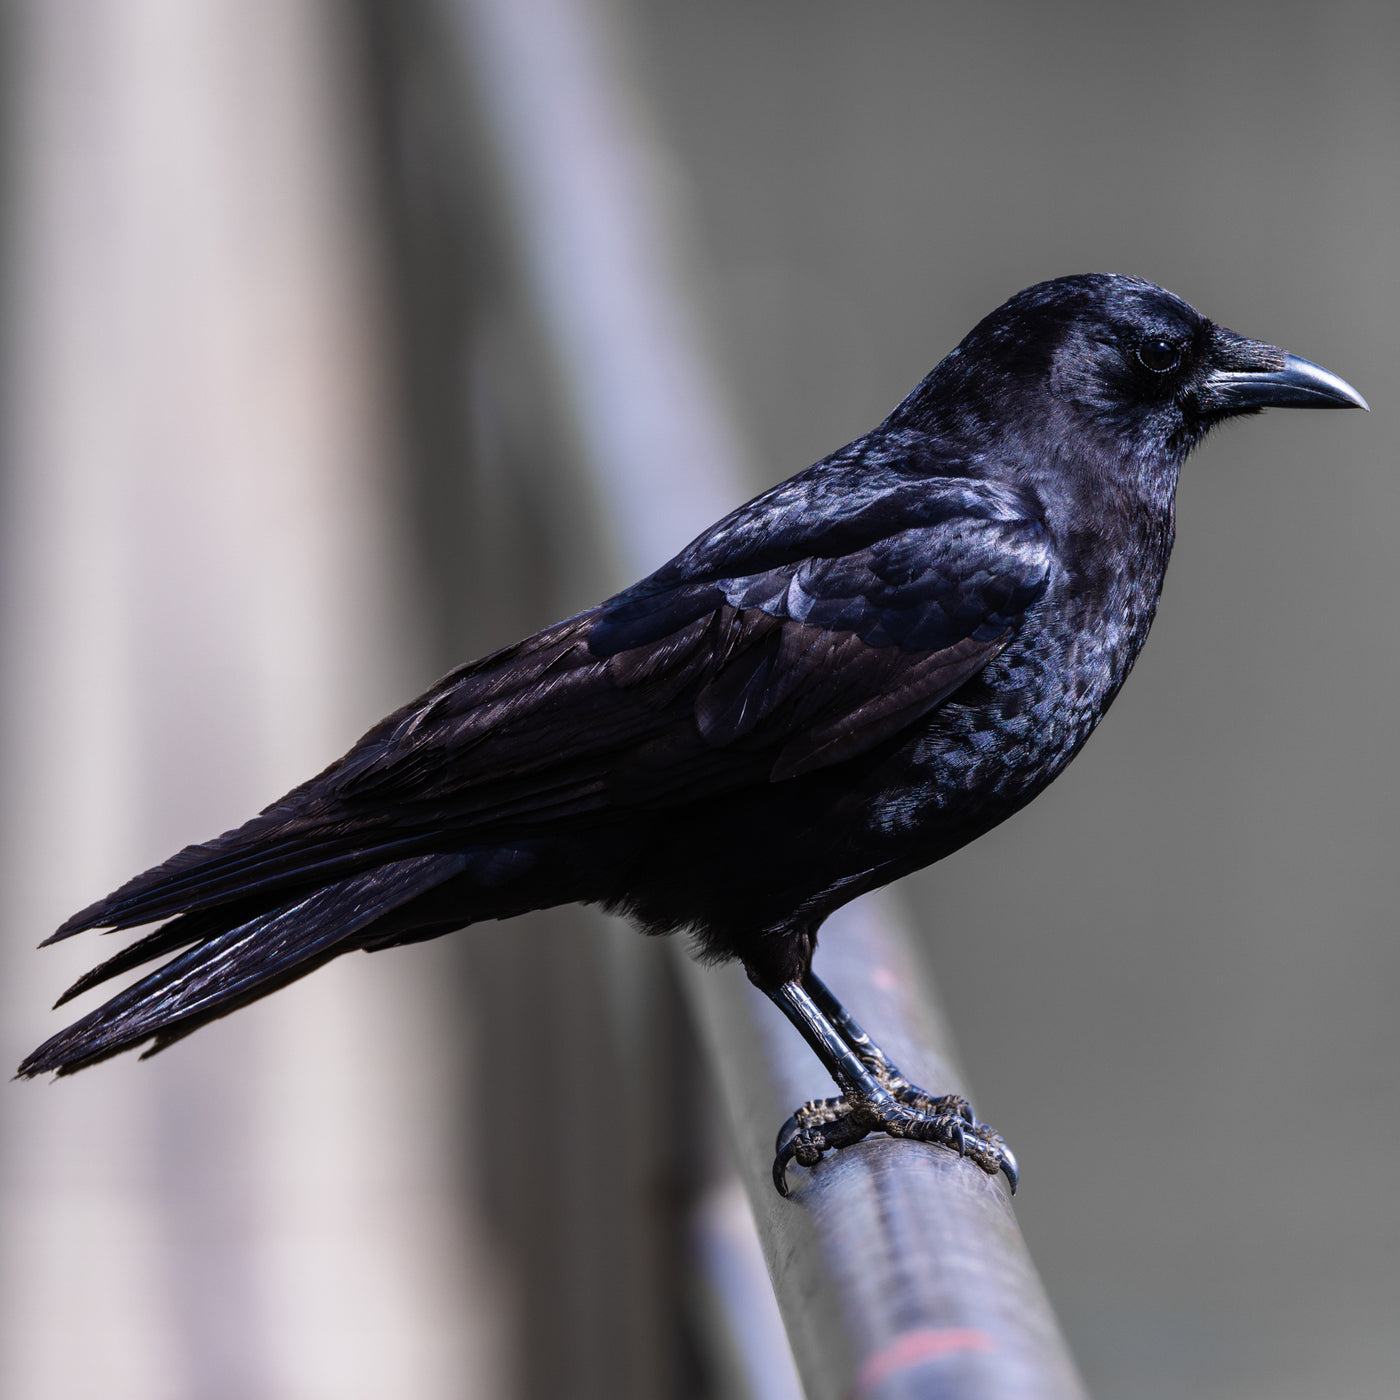 Profile of black crow perched on railing